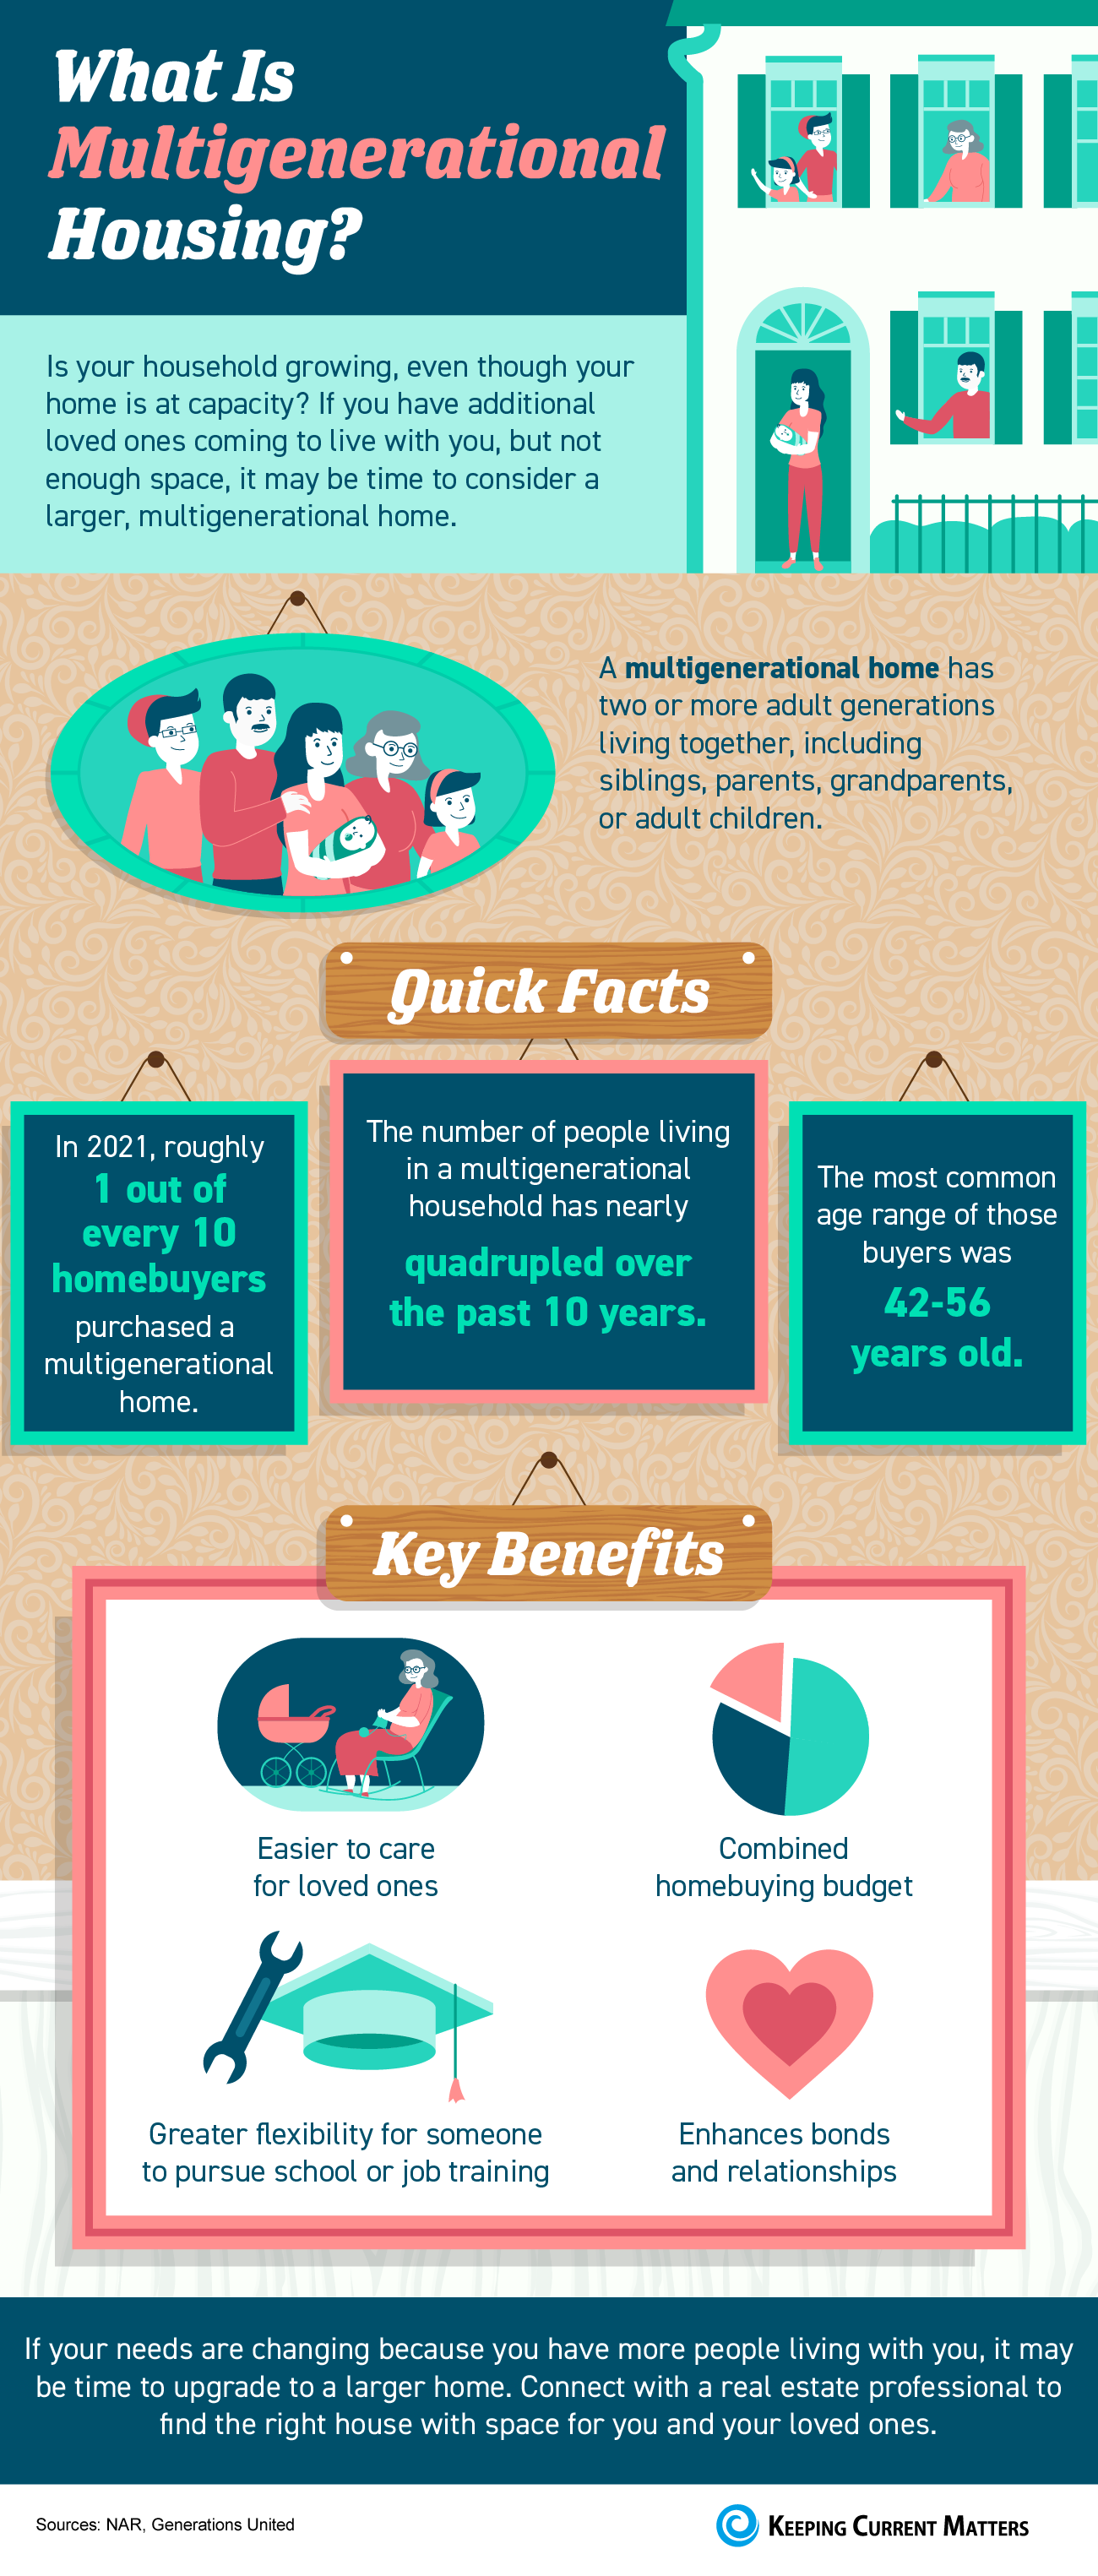 What Is Multigenerational Housing? [INFOGRAPHIC] | Keeping Current Matters